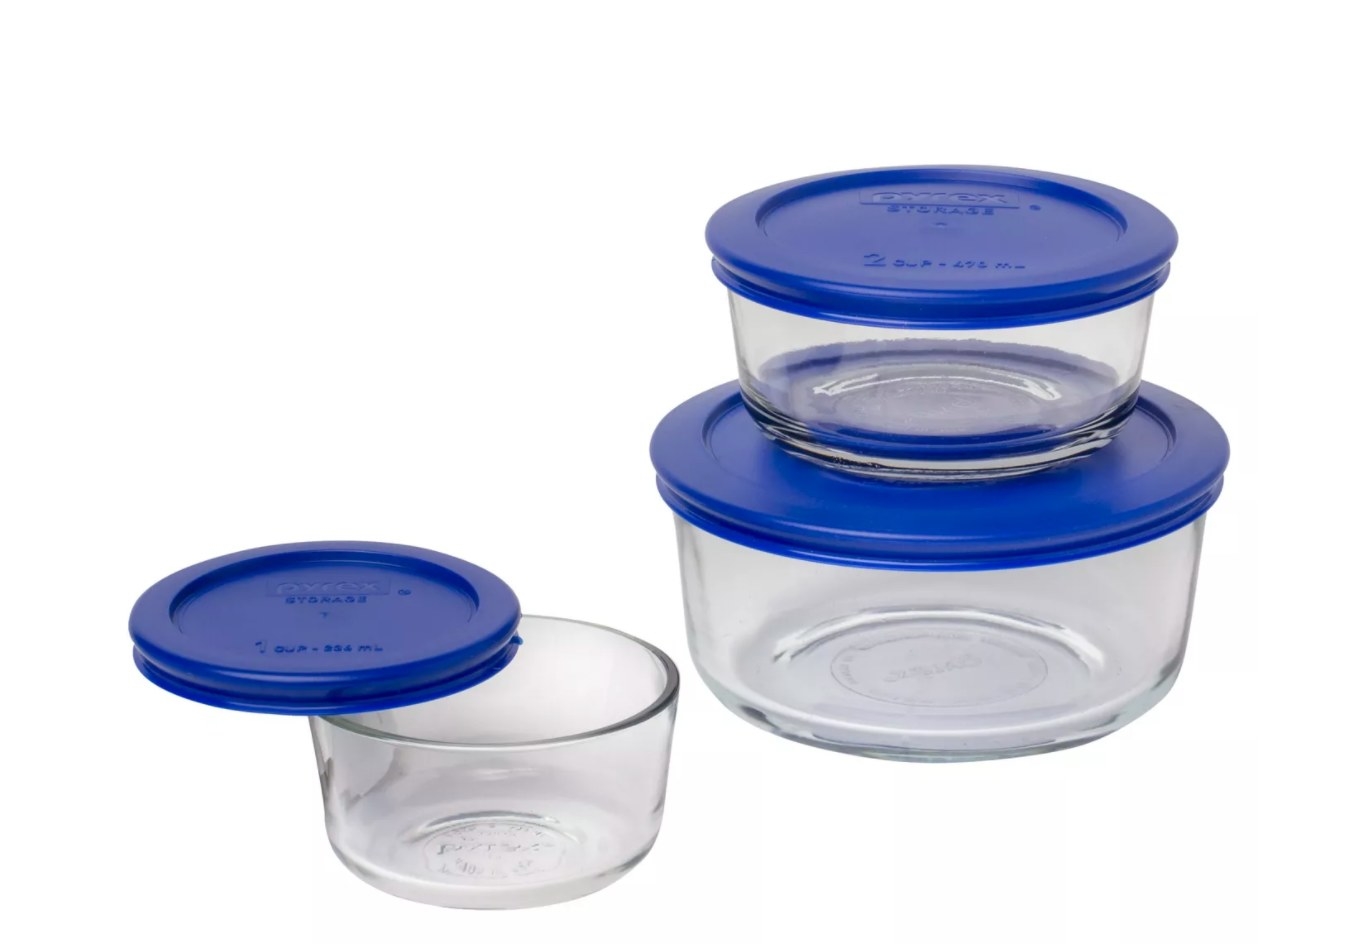 A set of three glass food storage containers with blue tops.